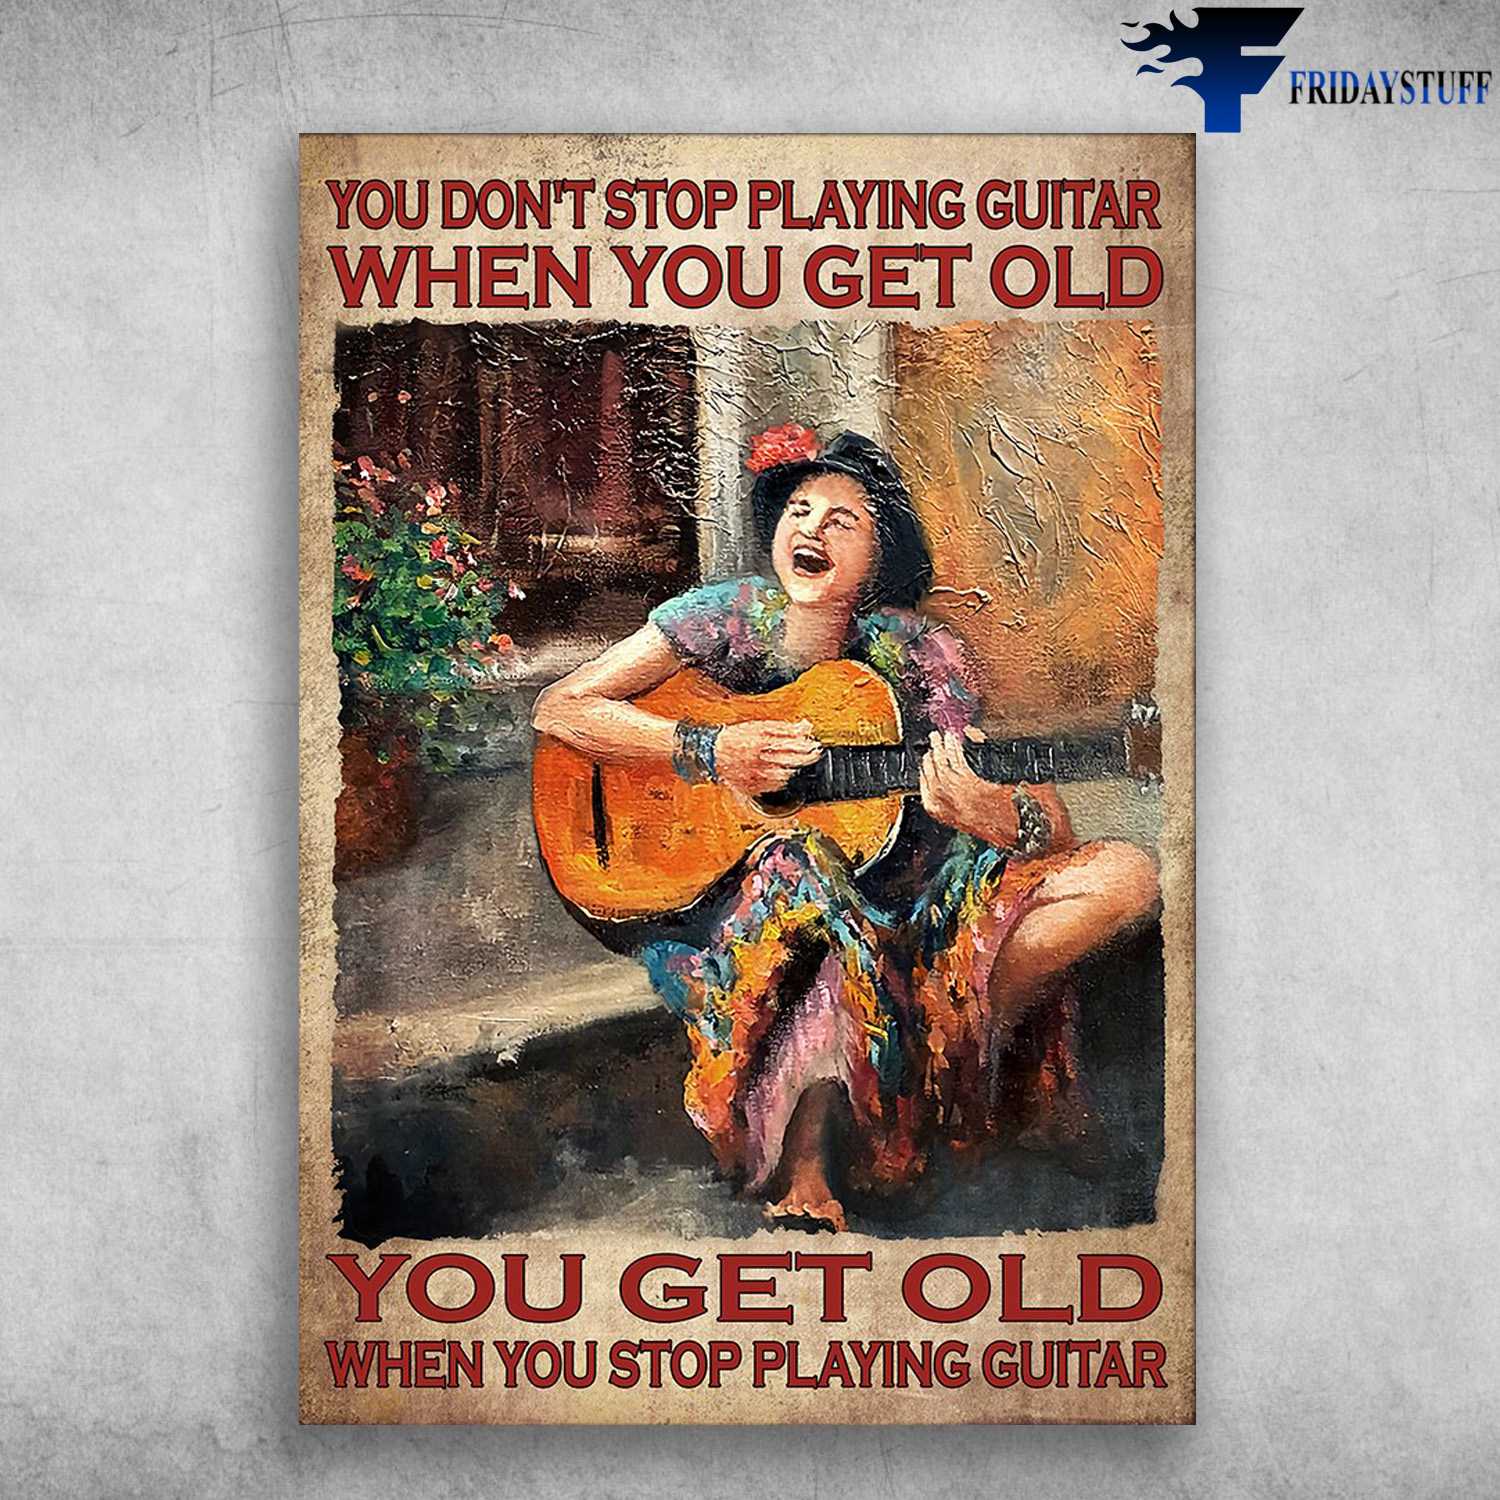 Old Lady Loves Guitar - You Don't Stop Playing Guitar When You Get Old, You Get Old When You Stop Playing Guitar